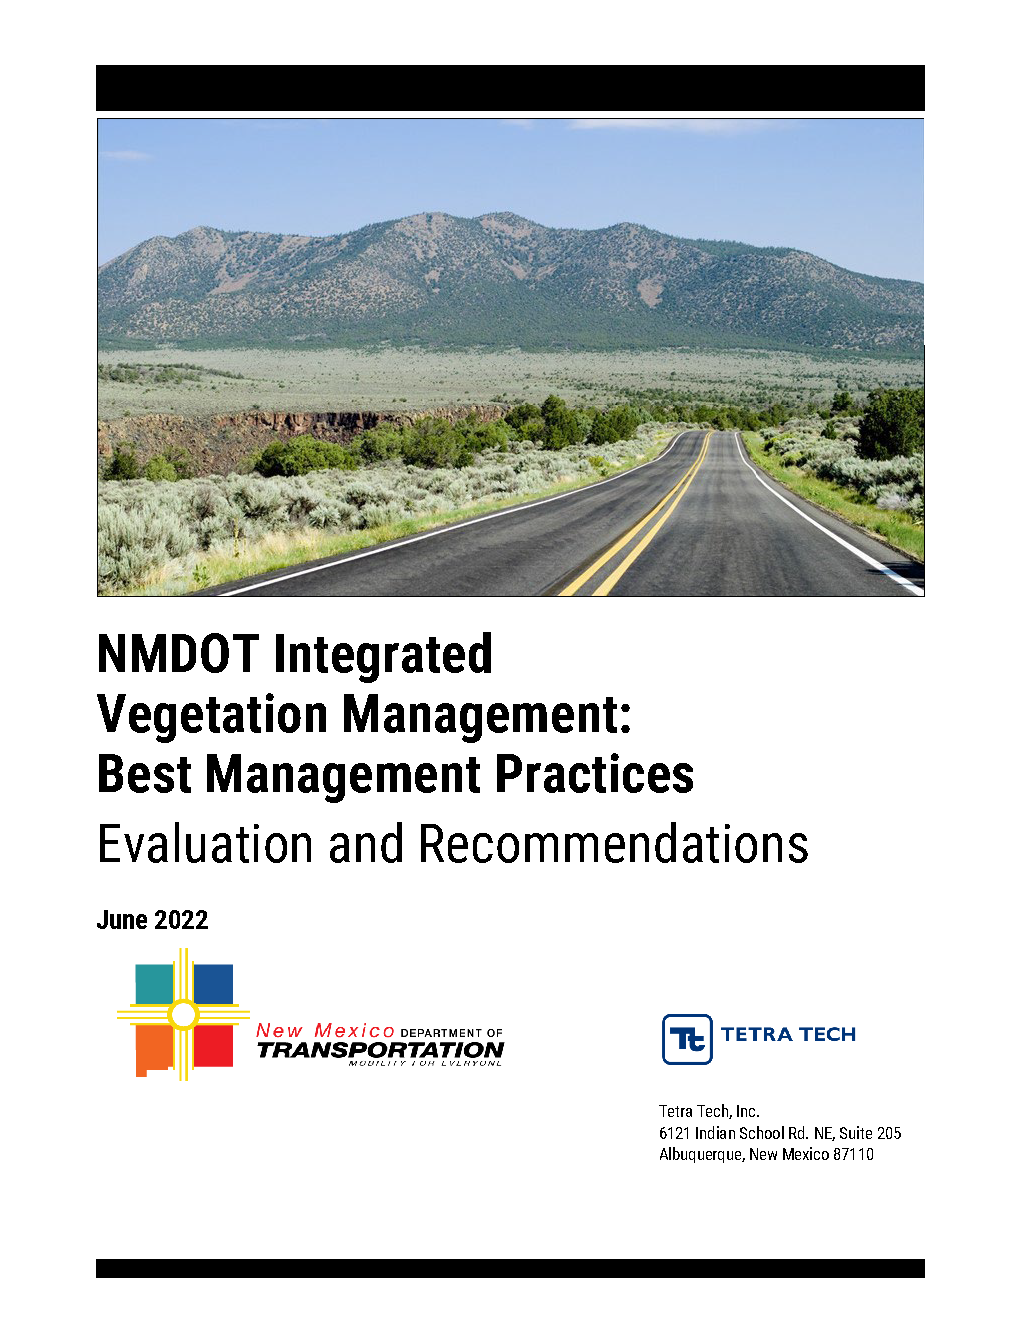 Cover of IVM Best Management Practices, June 2022